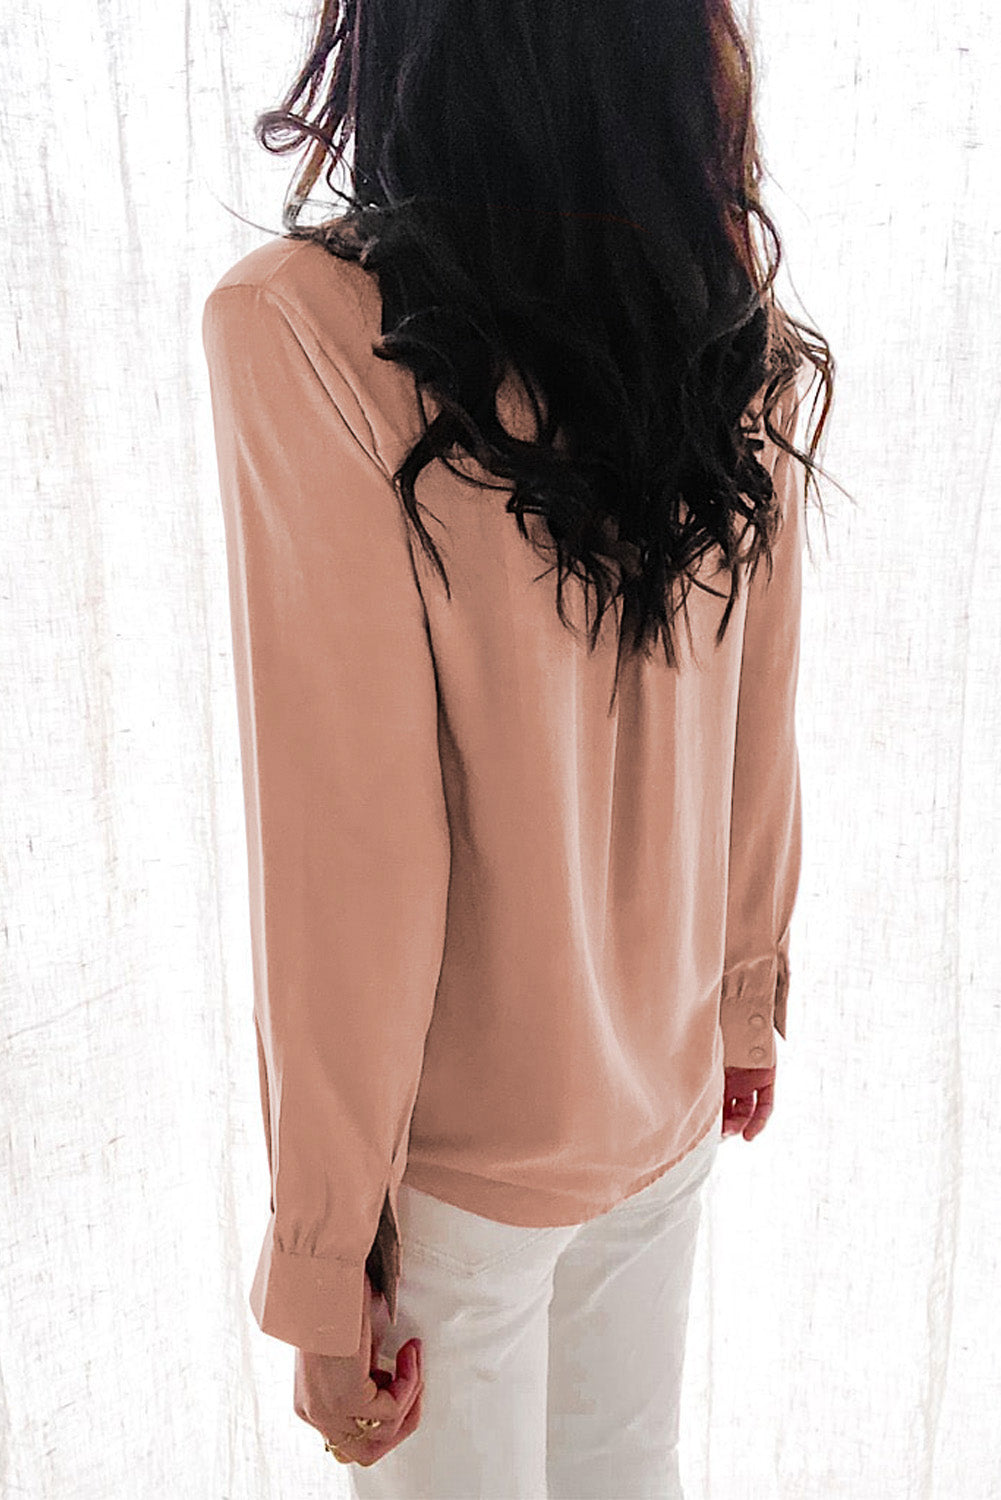 Solid Color Lace Frilled Trims Long Sleeve Shirt